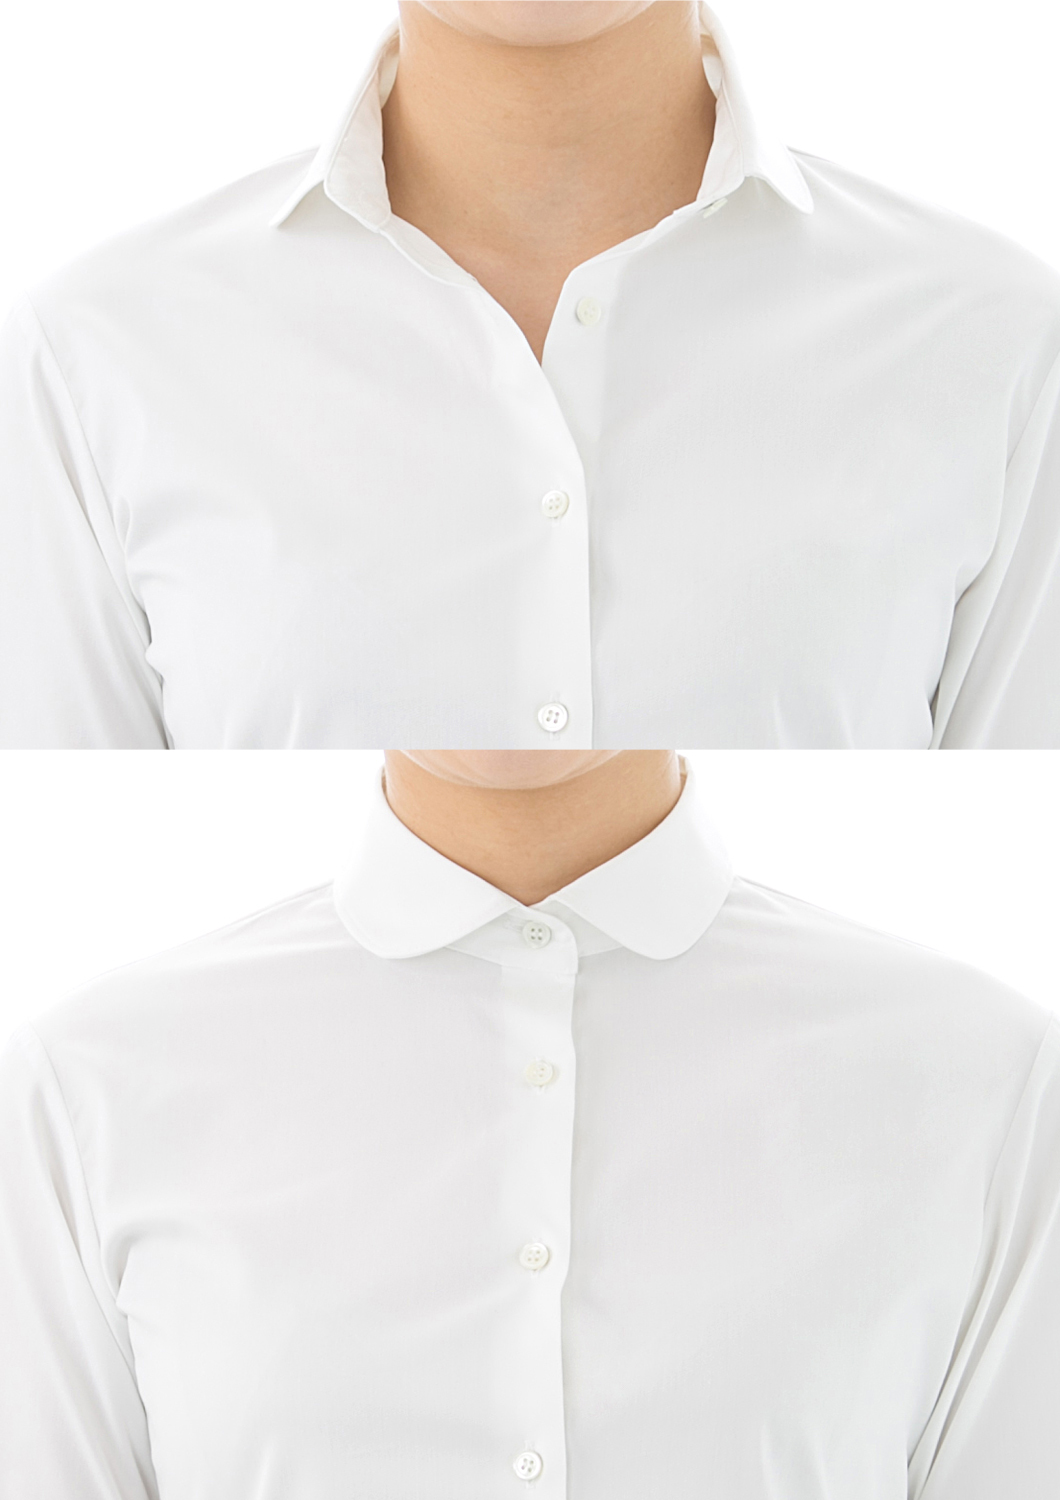 Premium Stretch Easy Care Rounded Point Collar Long Sleeve Shirt White